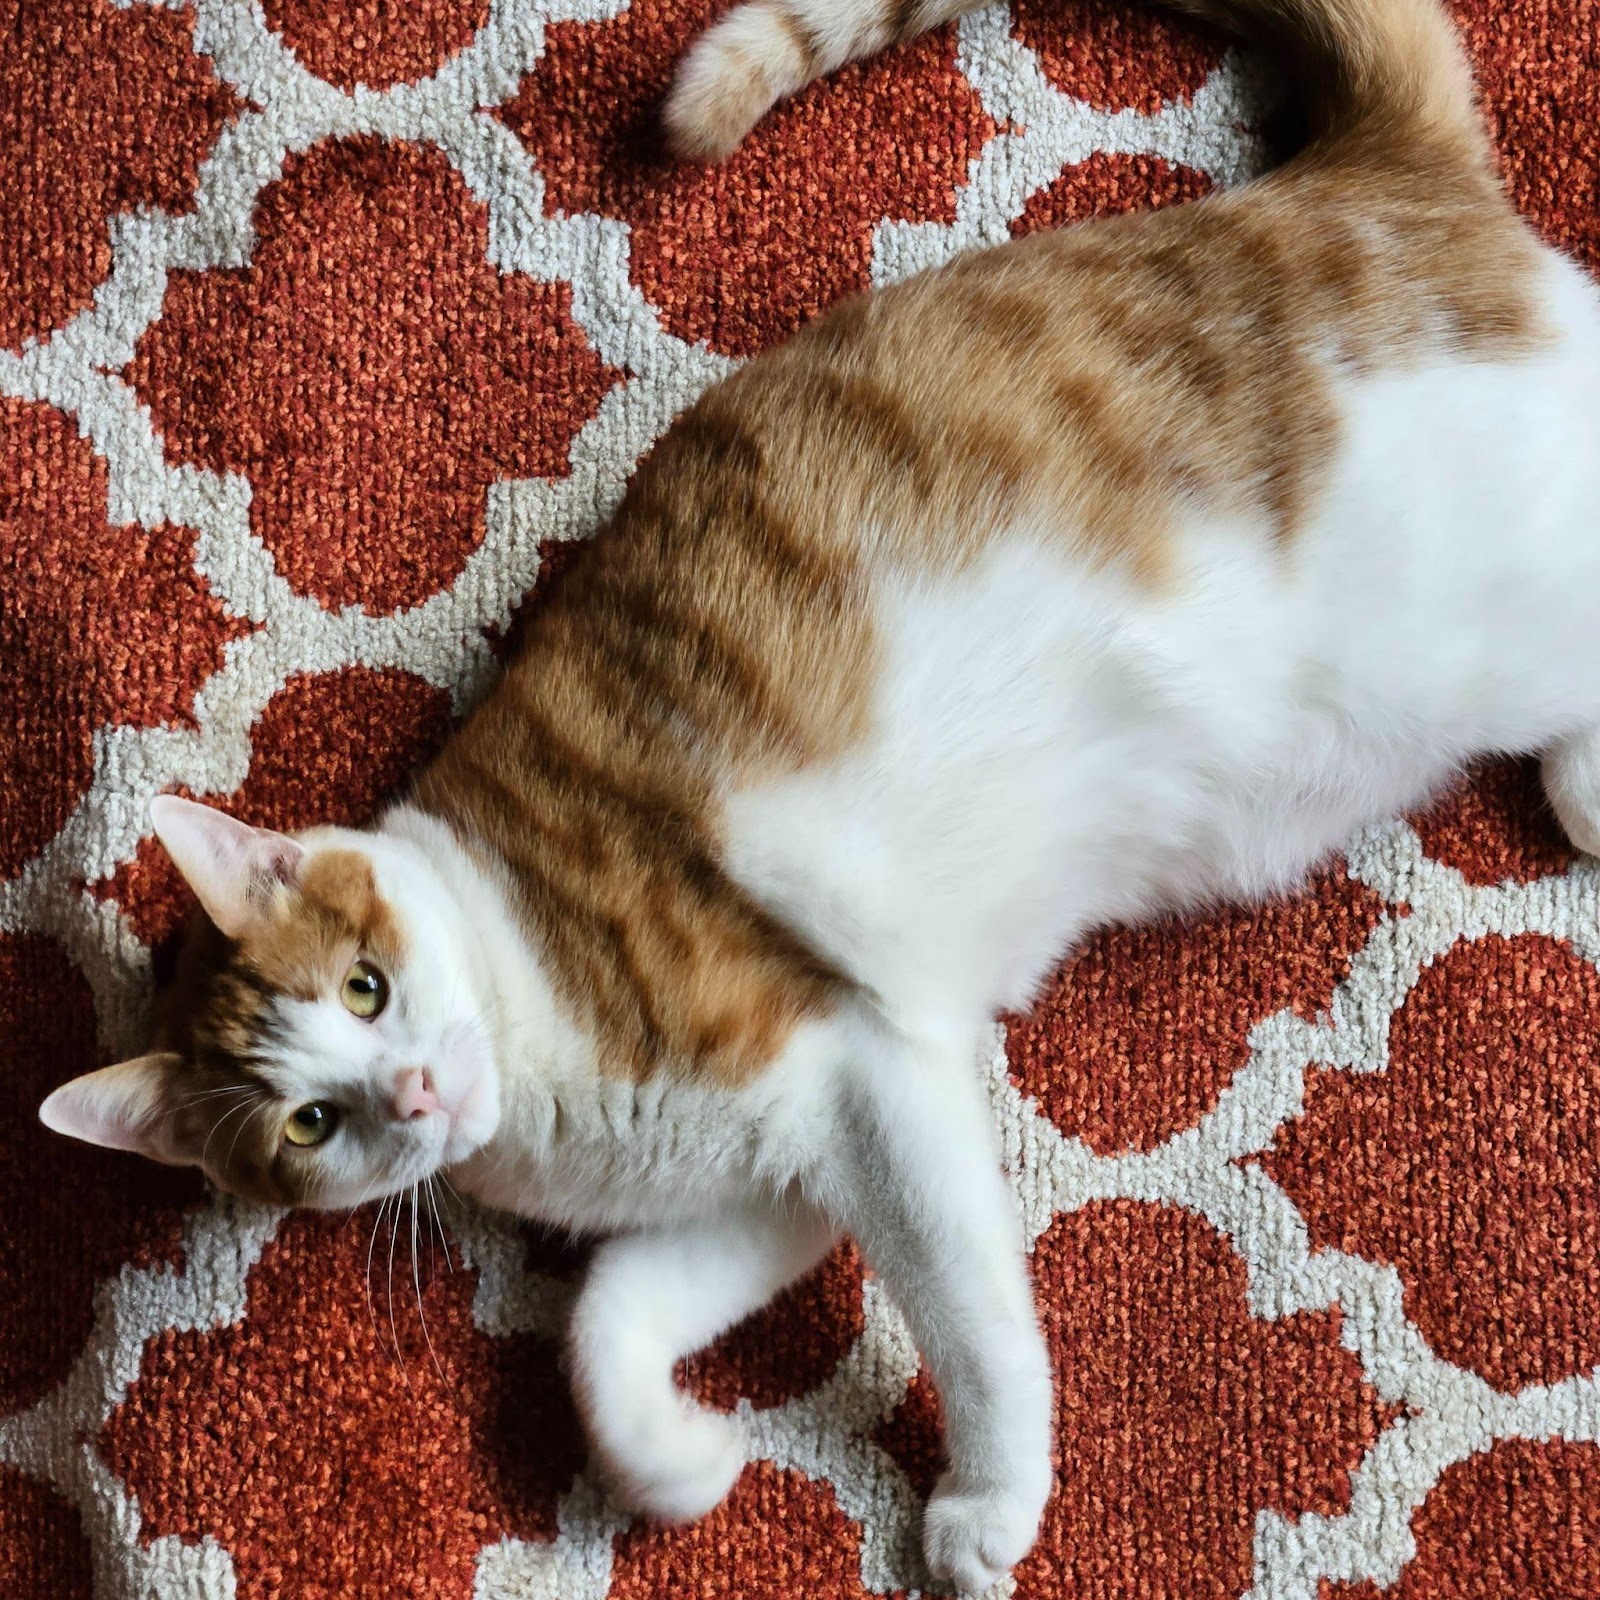 Percy, a beautiful cat with orange striped patches over a white coat, lounges on the carpet. 